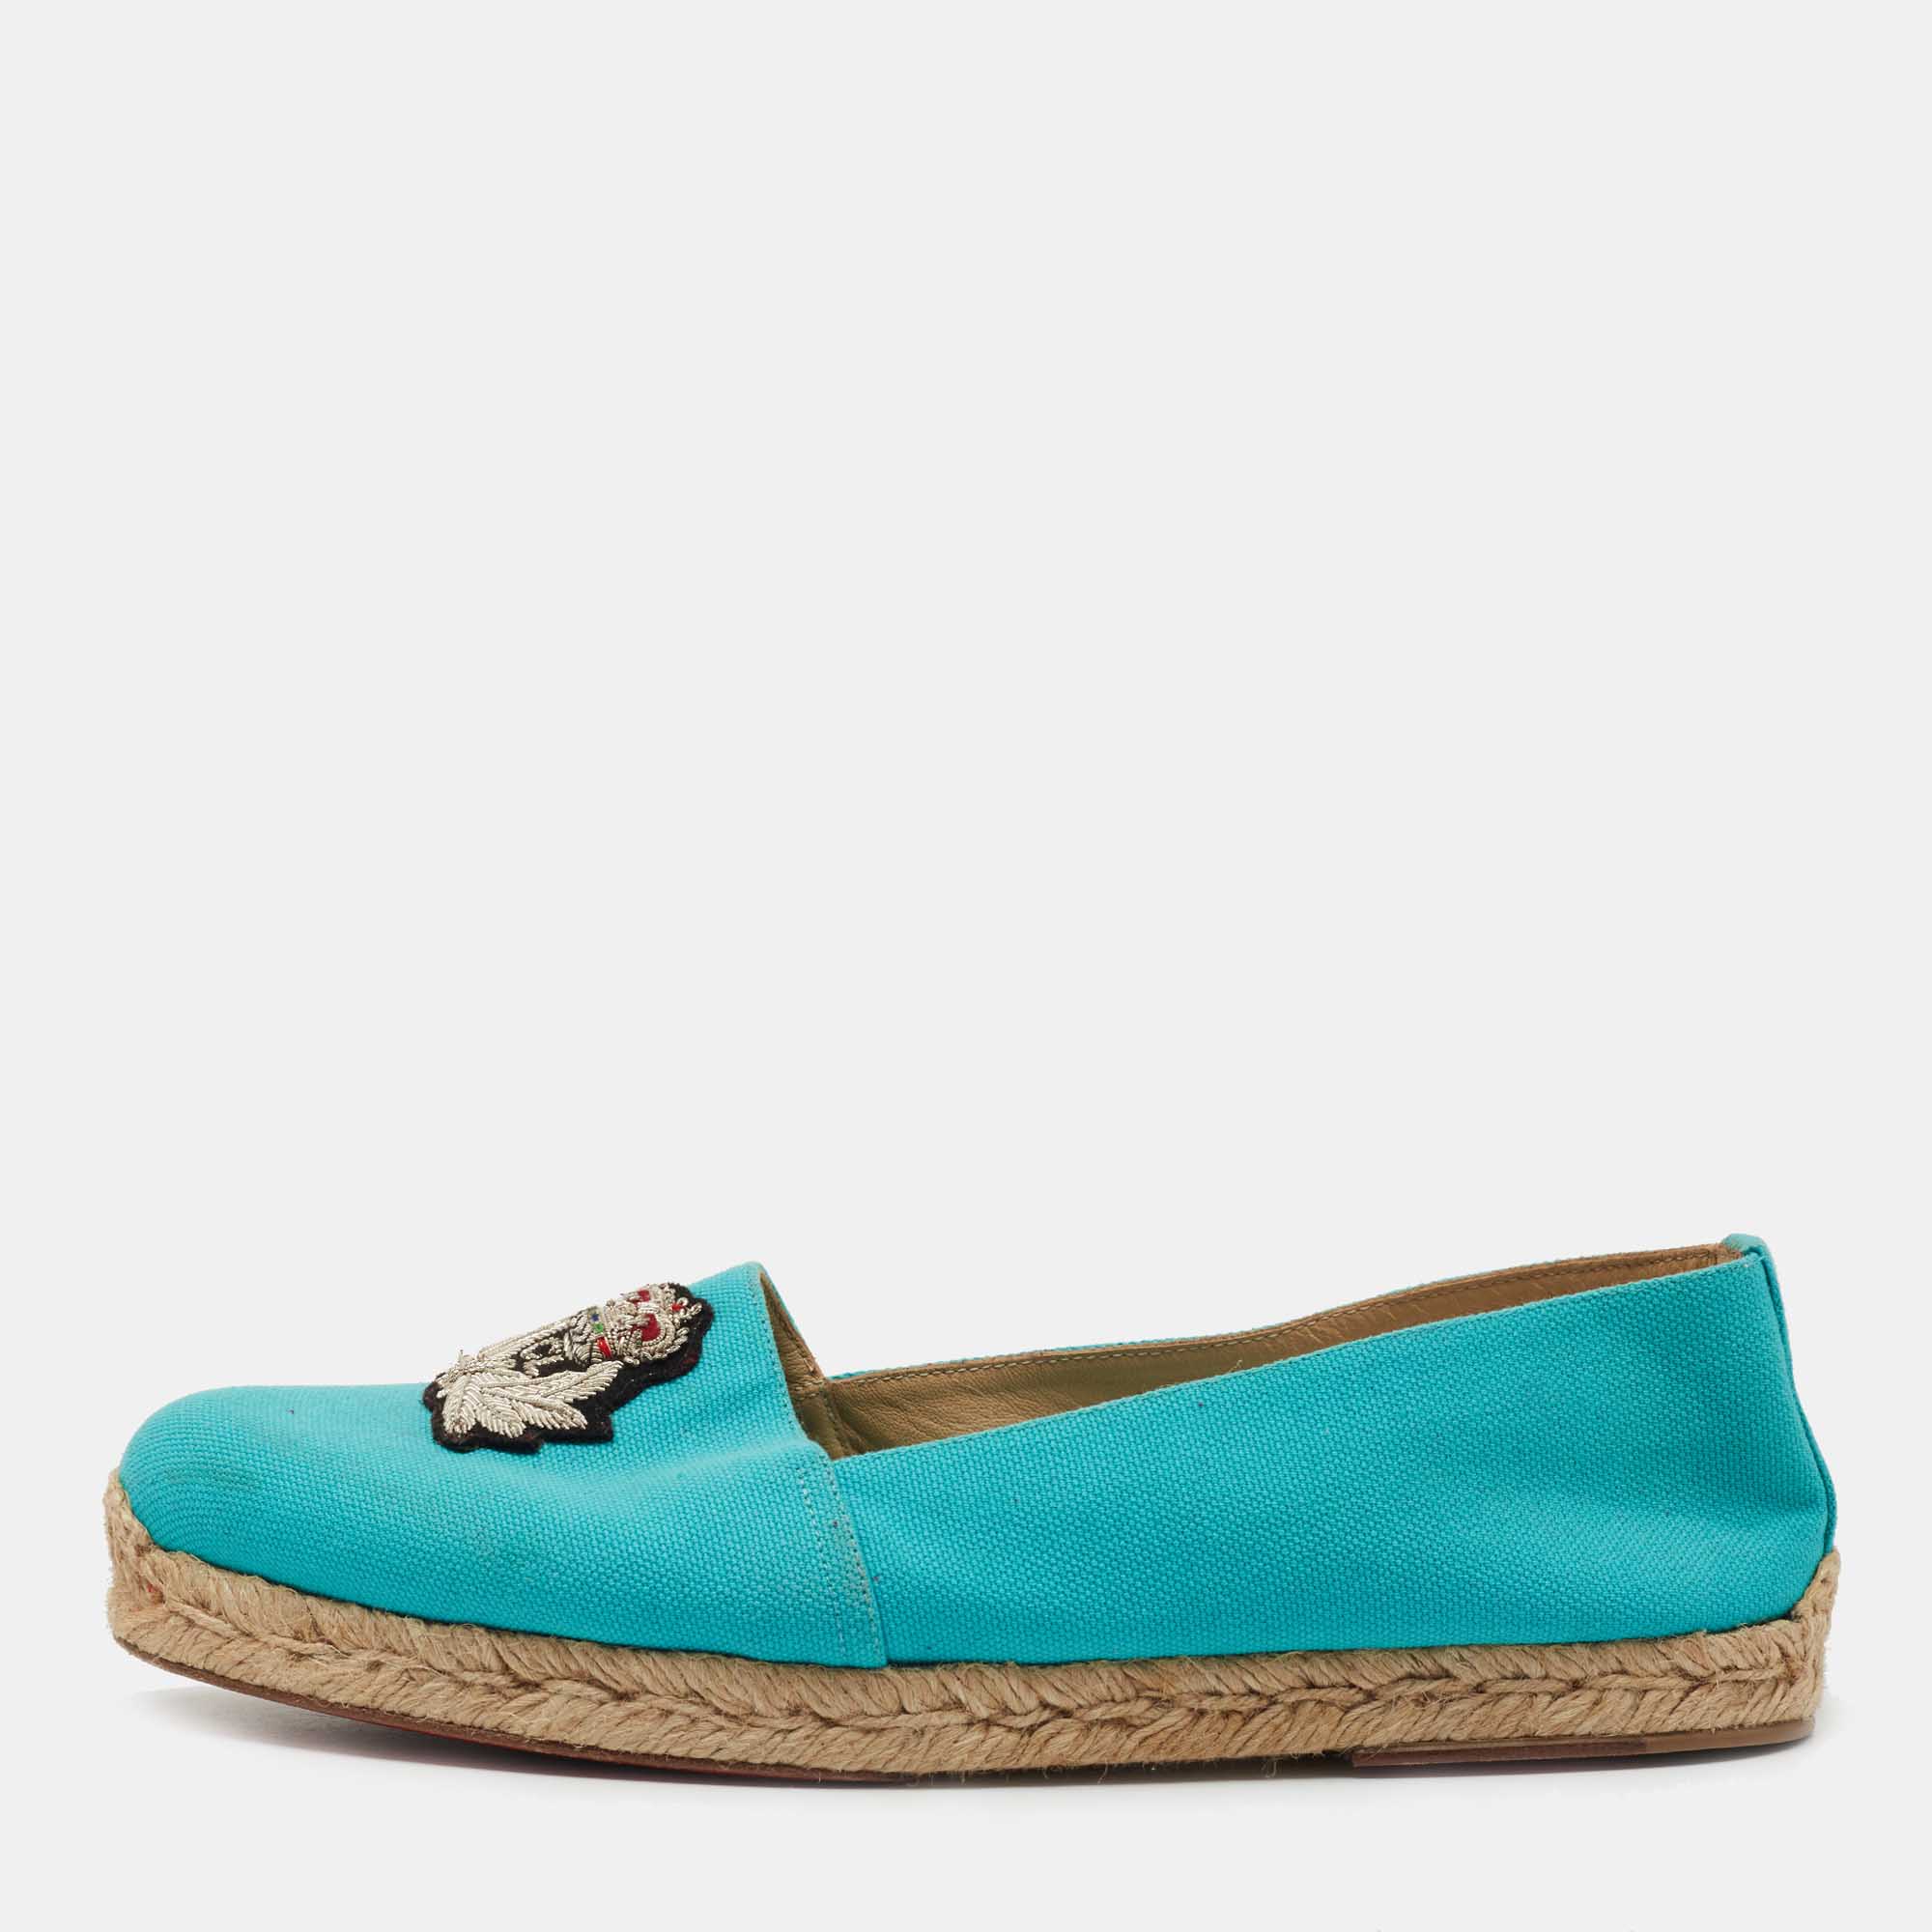 Pre-owned Christian Louboutin Aqua Blue Canvas Gala Embroidered Crest Espadrille Flats Size 40